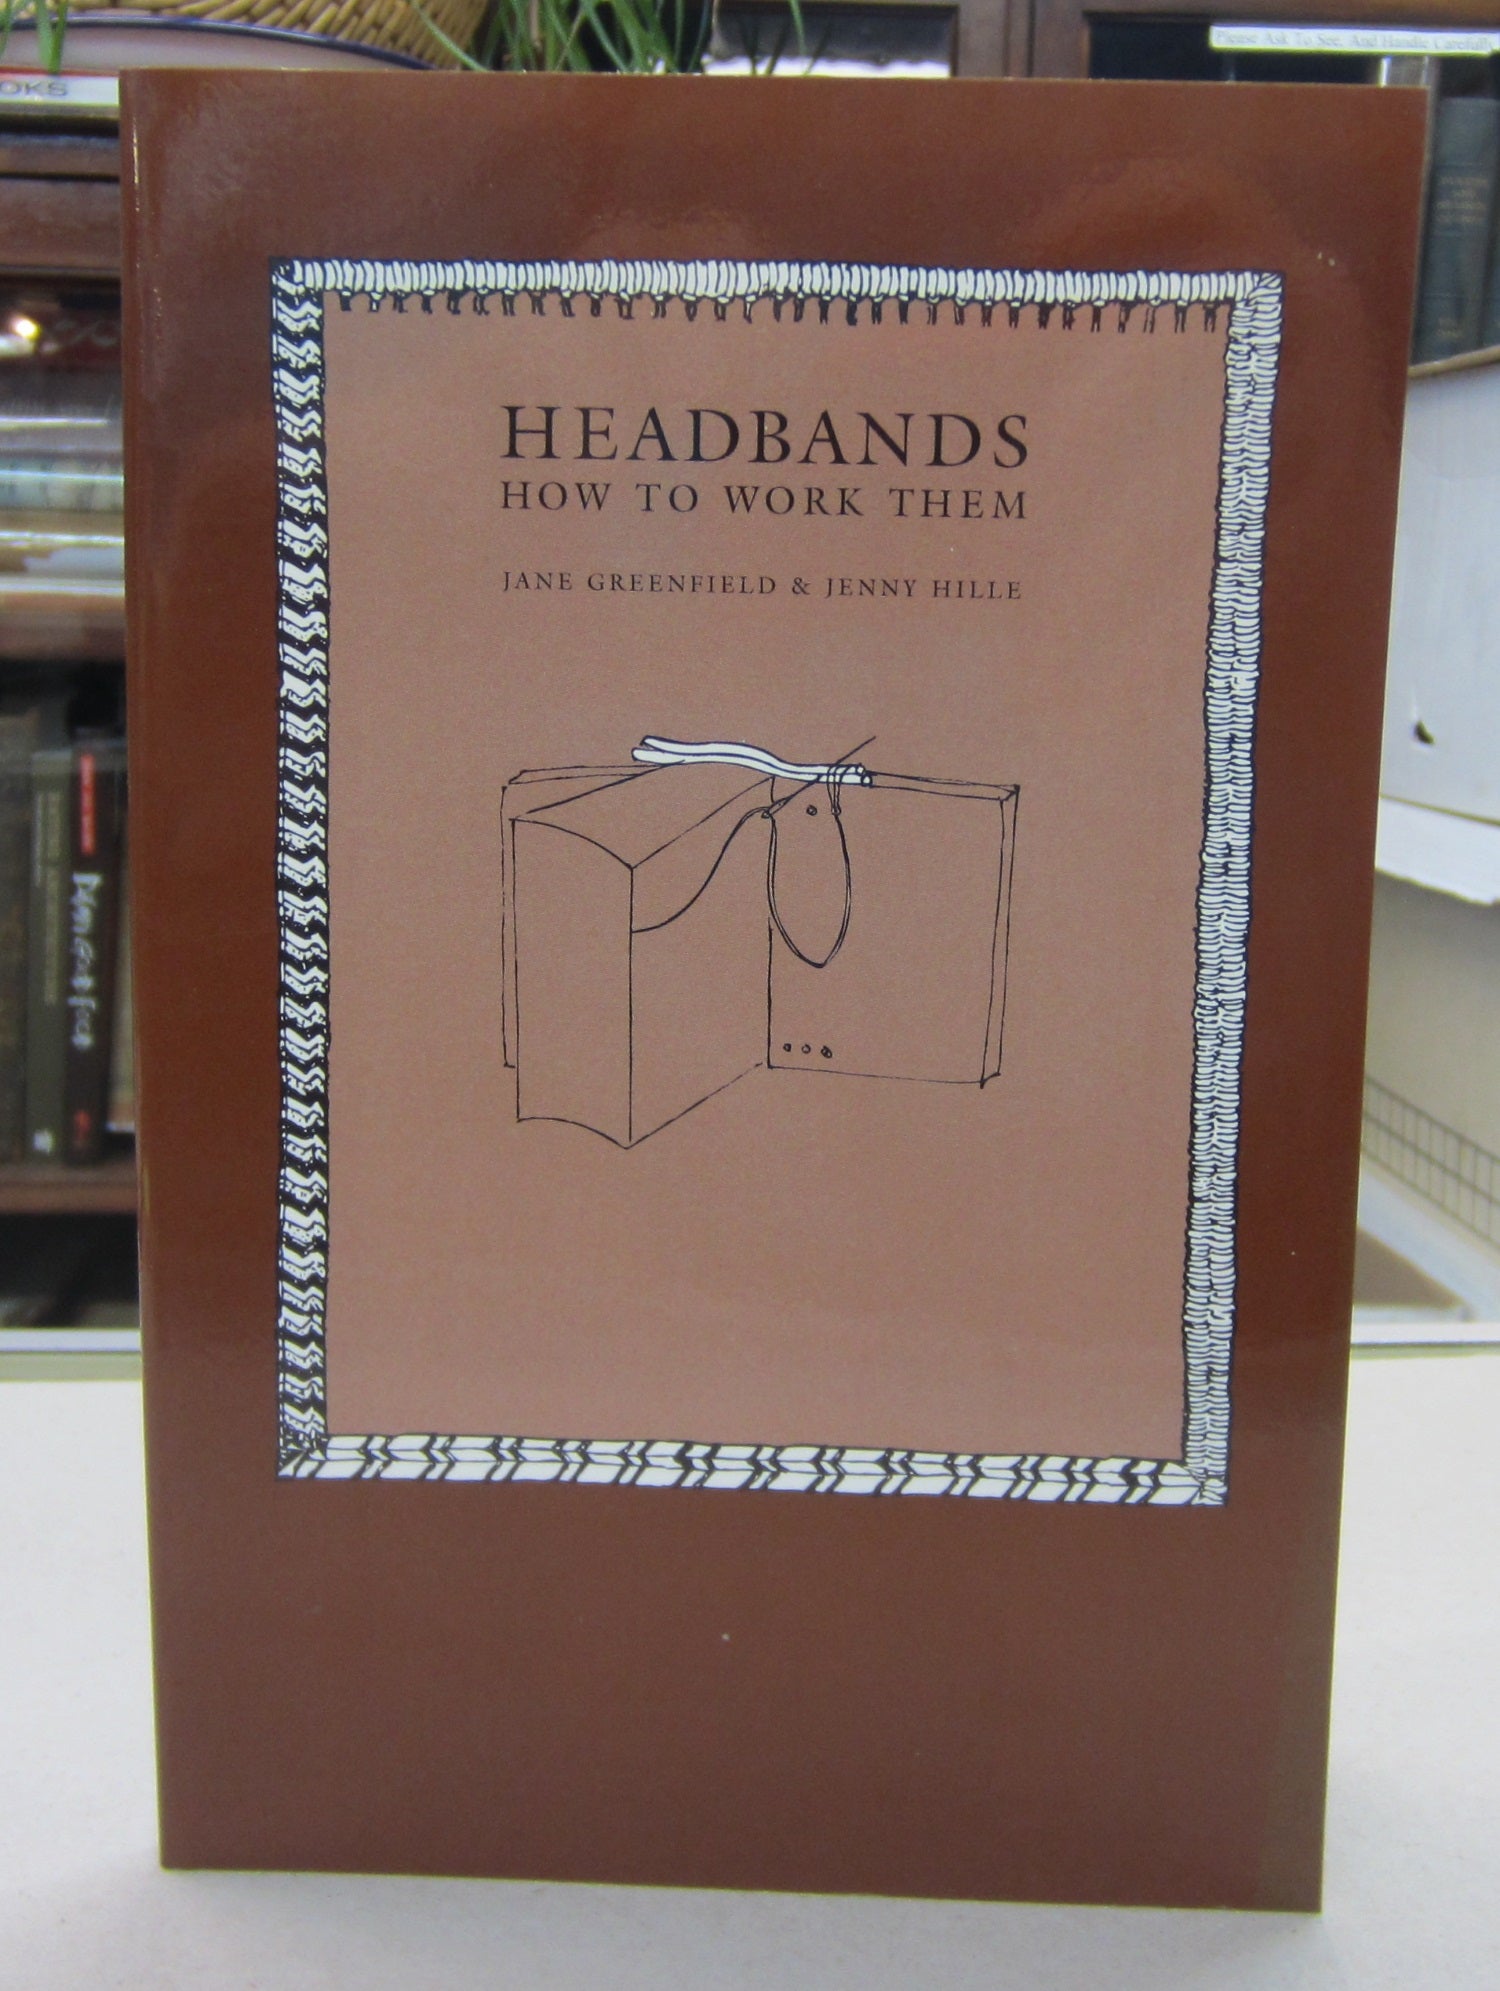 Headbands: How to Work Them  Jane Greenfield, Jenny Hille